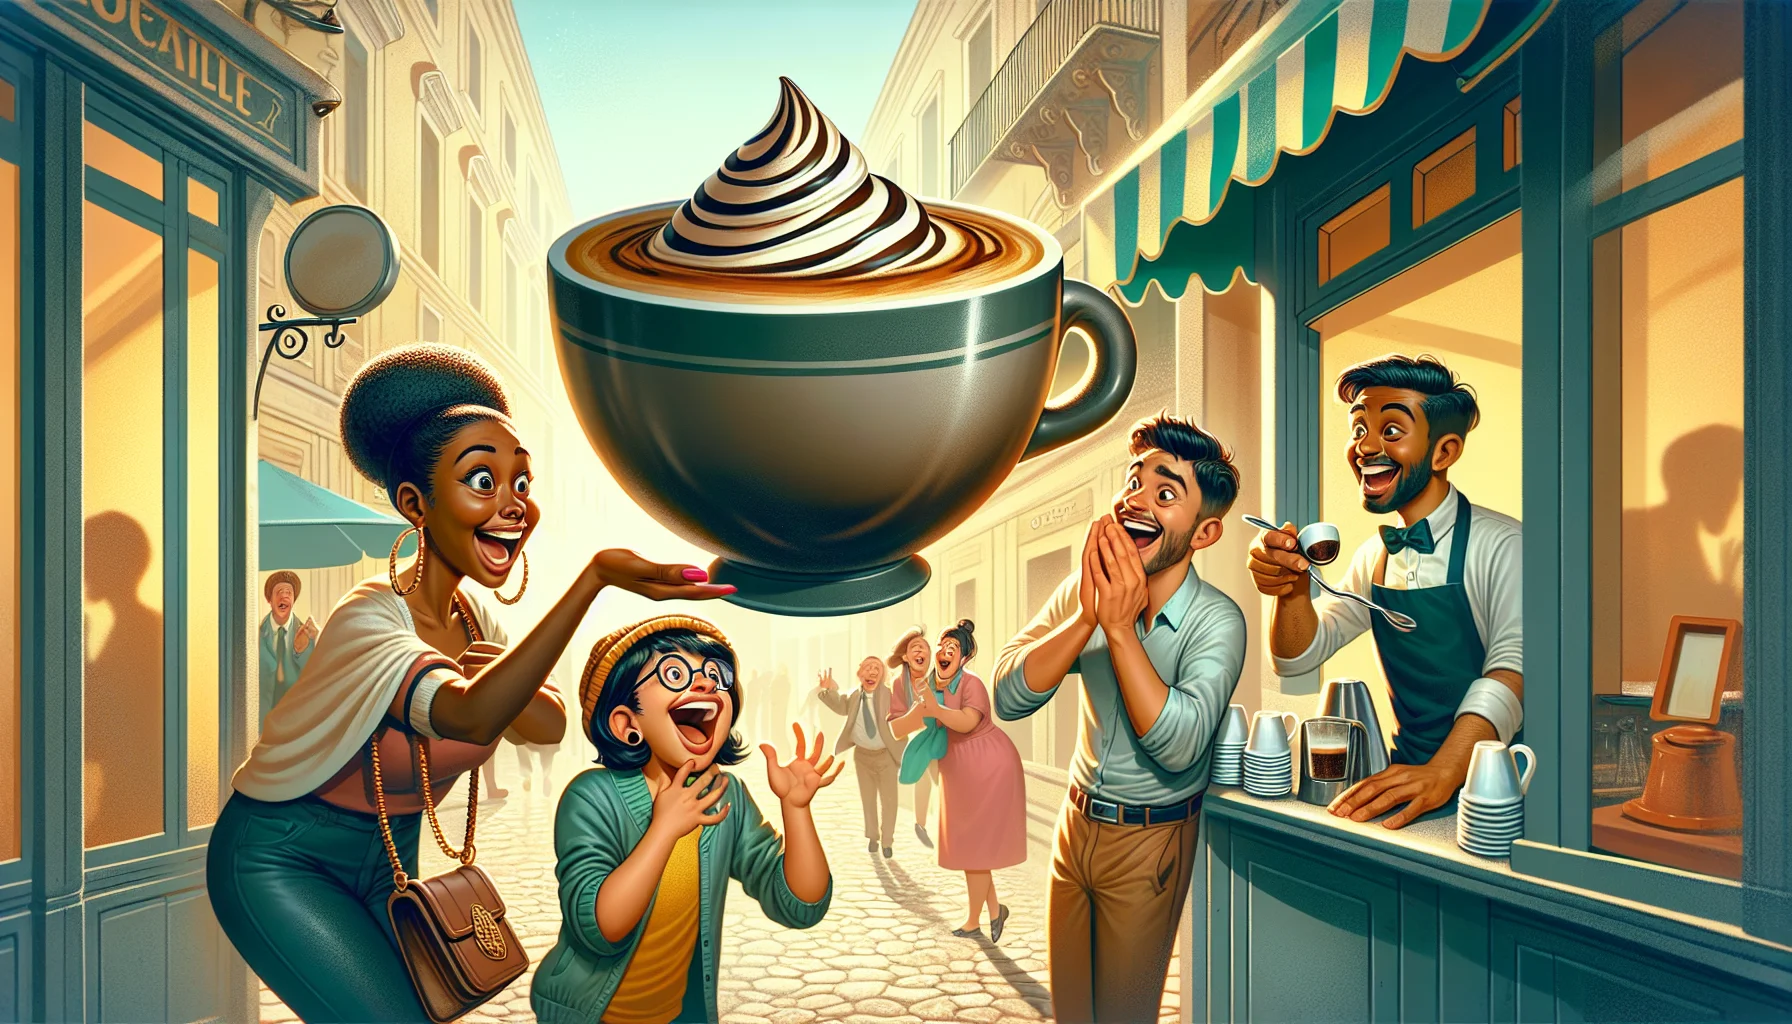 Illustrate an amusing scenario meant to inspire people to enjoy their espresso doppio. Picture a whimsical street café setting with the main showpiece being an oversized, brimming cup of espresso doppio. A surprised Black woman, a delighted Hispanic man and a chuckling Middle-Eastern teenager each discovering the gigantic cup and reacting with astonishment and joy. Include a well-dressed barista who is South Asian in ethnicity, standing behind the counter and laughing at their reactions. Incorporate details like the rich, creamy texture of the espresso, the ornate spoon for stirring perfectly capturing the fun of the moment.